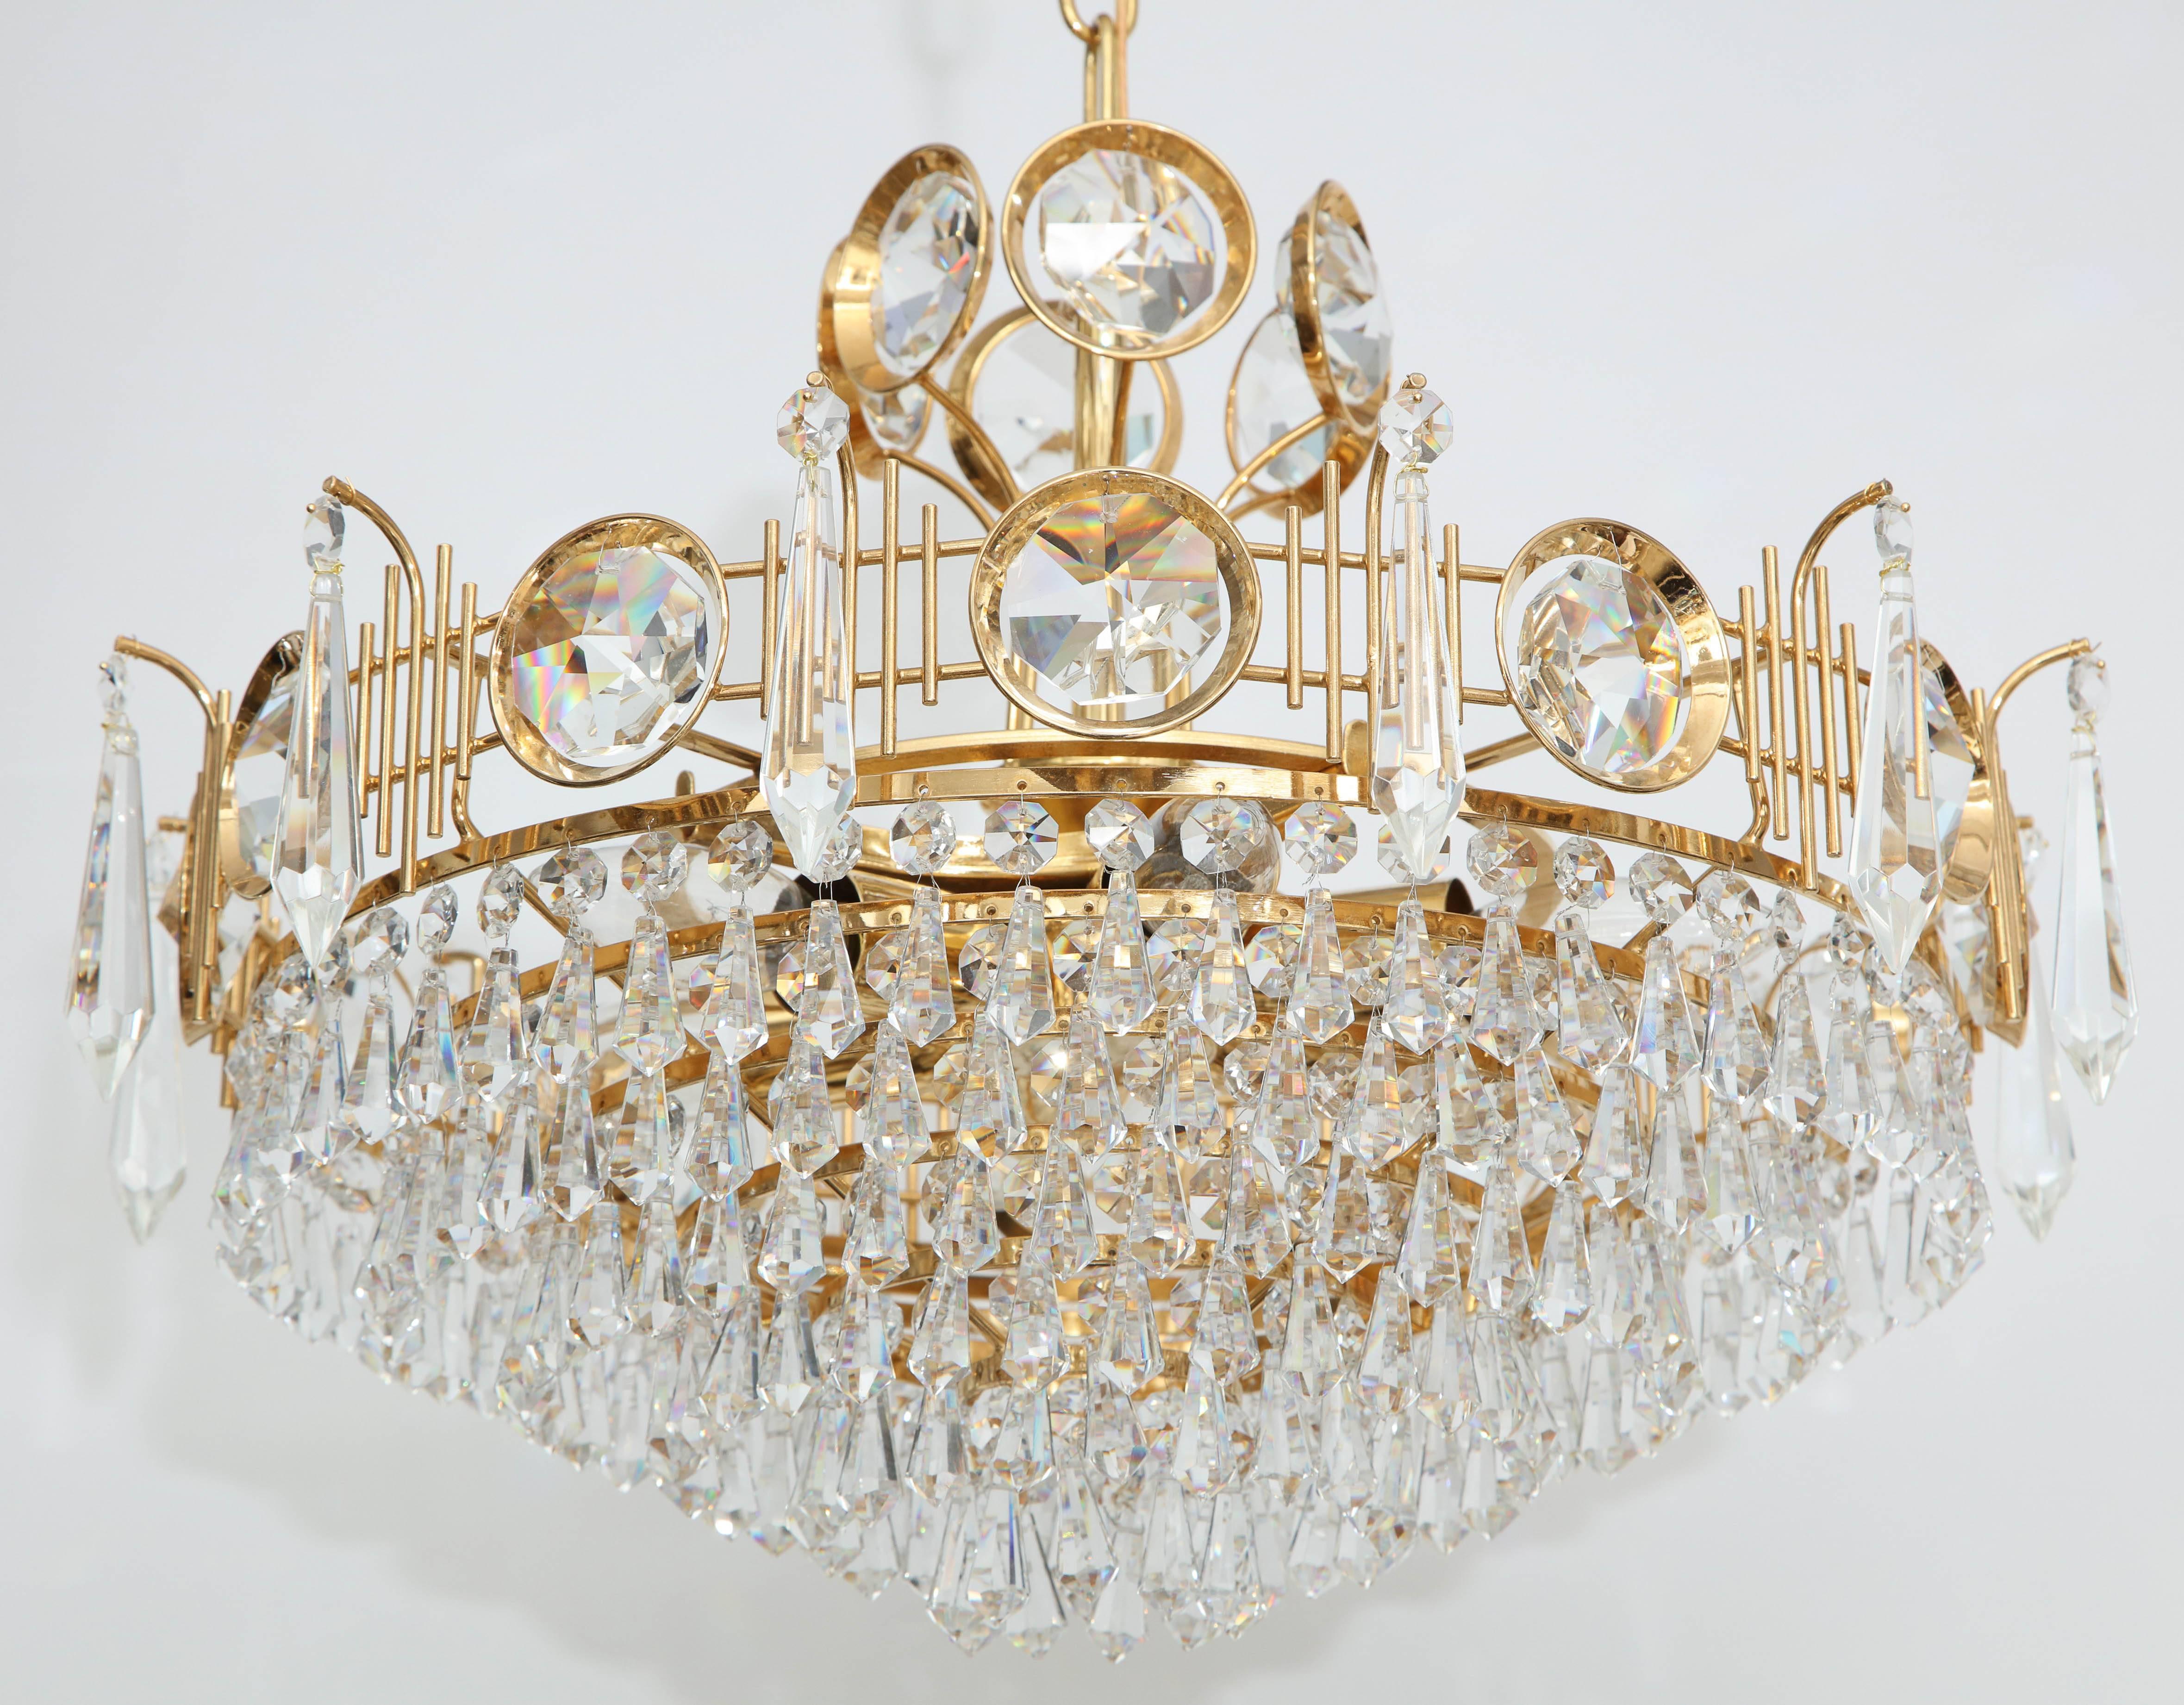 Stunning multi tiered crystal tear drop chandelier with faceted crystal discs on a 22-Karat gold plated frame. Rewired for use in the USA. Gold plated brass frame houses eight sockets which use candelabra type bulbs. Chandelier body is 12.25 inches